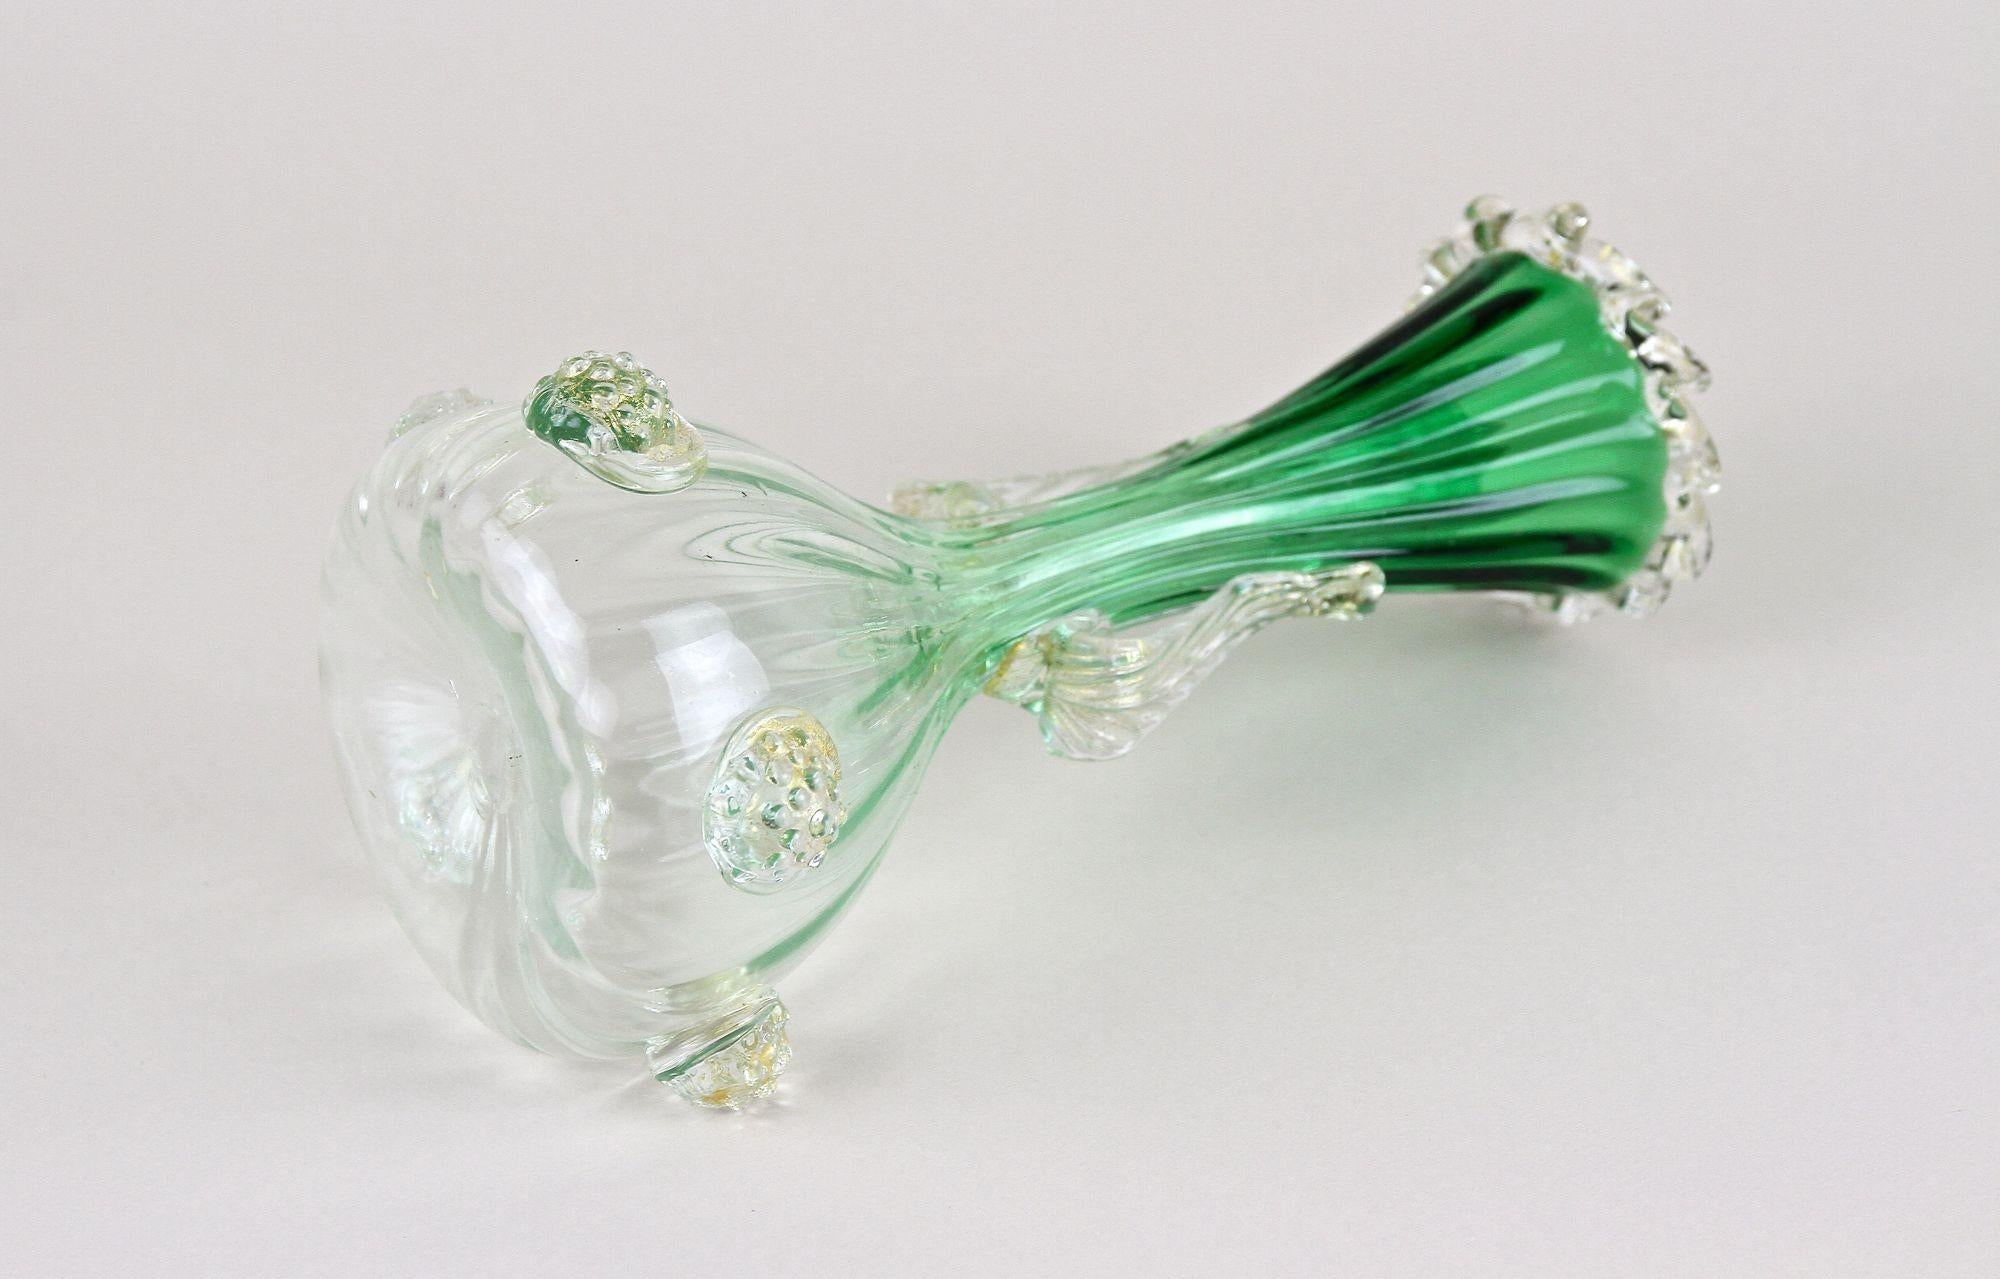 Green/ White Murano Glass Vase With 24k Gold Flakes by Fratelli Toso, IT ca 1930 For Sale 5